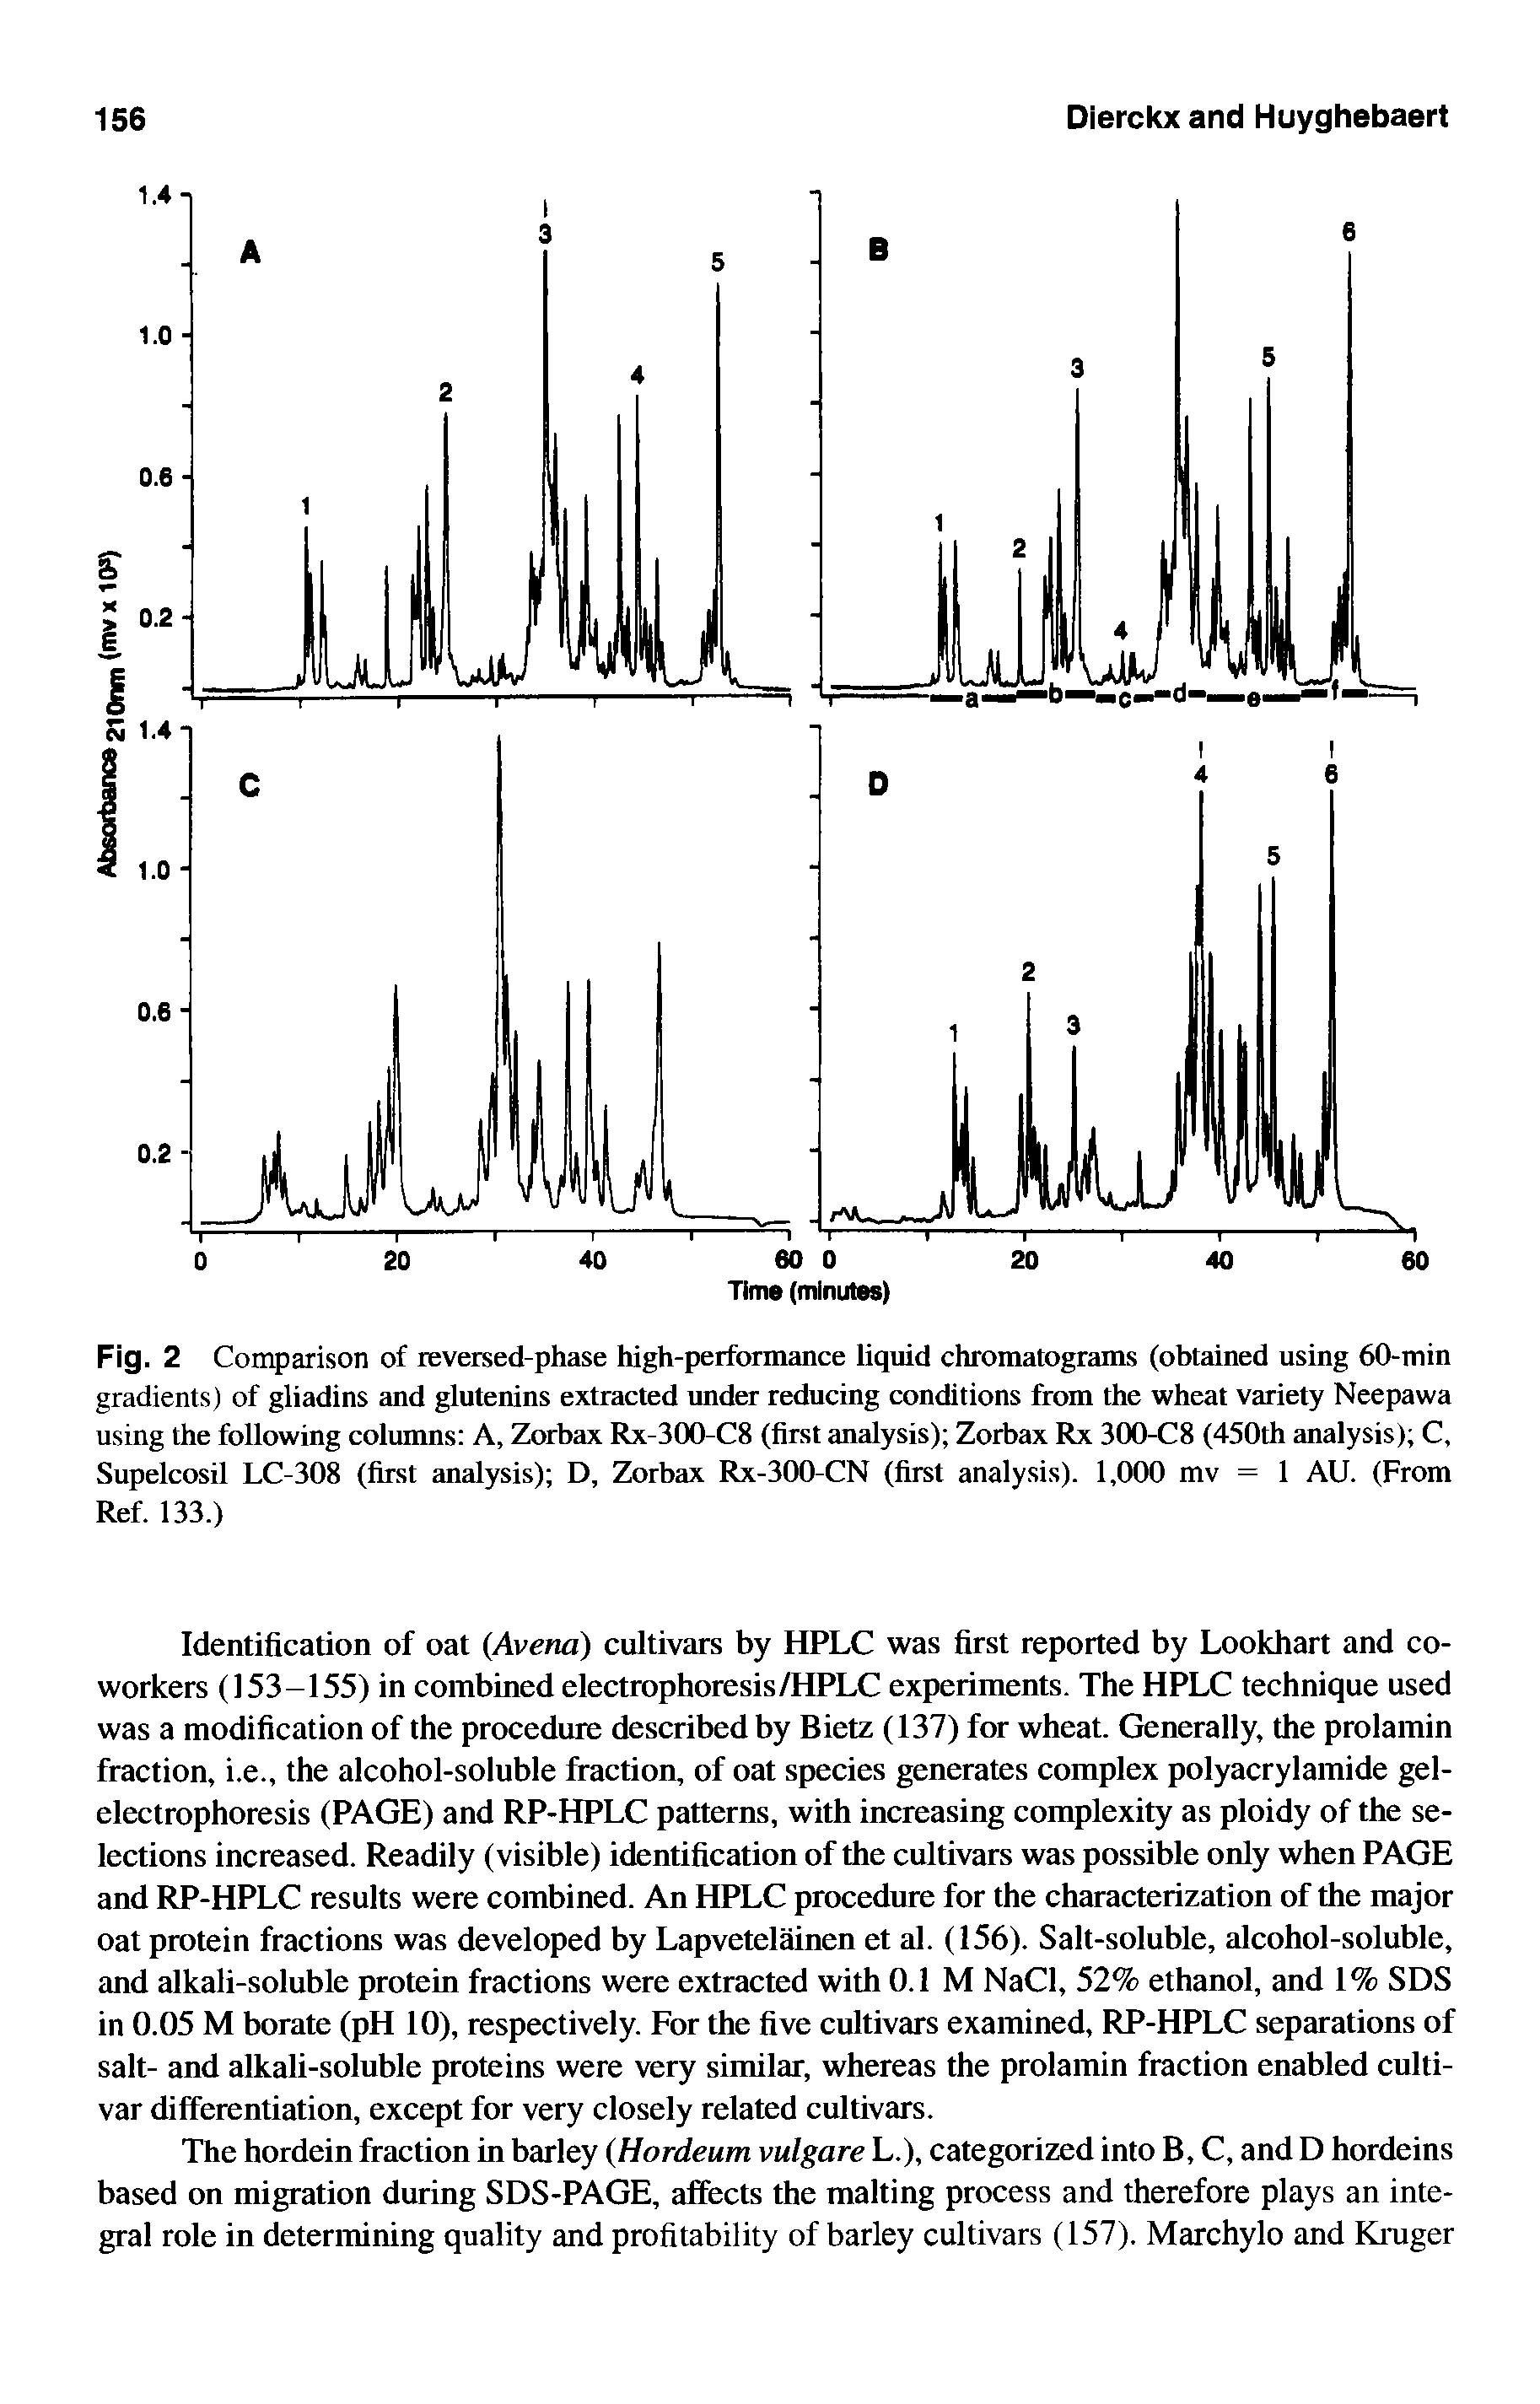 Fig. 2 Comparison of reversed-phase high-performance liquid chromatograms (obtained using 60-min gradients) of gliadins and glutenins extracted under reducing conditions from the wheat variety Neepawa using the following columns A, Zorbax Rx-300-C8 (first analysis) Zorbax Rx 300-C8 (450th analysis) C, Supelcosil LC-308 (first analysis) D, Zorbax Rx-300-CN (first analysis). 1,000 mv = 1 AU. (From Ref. 133.)...